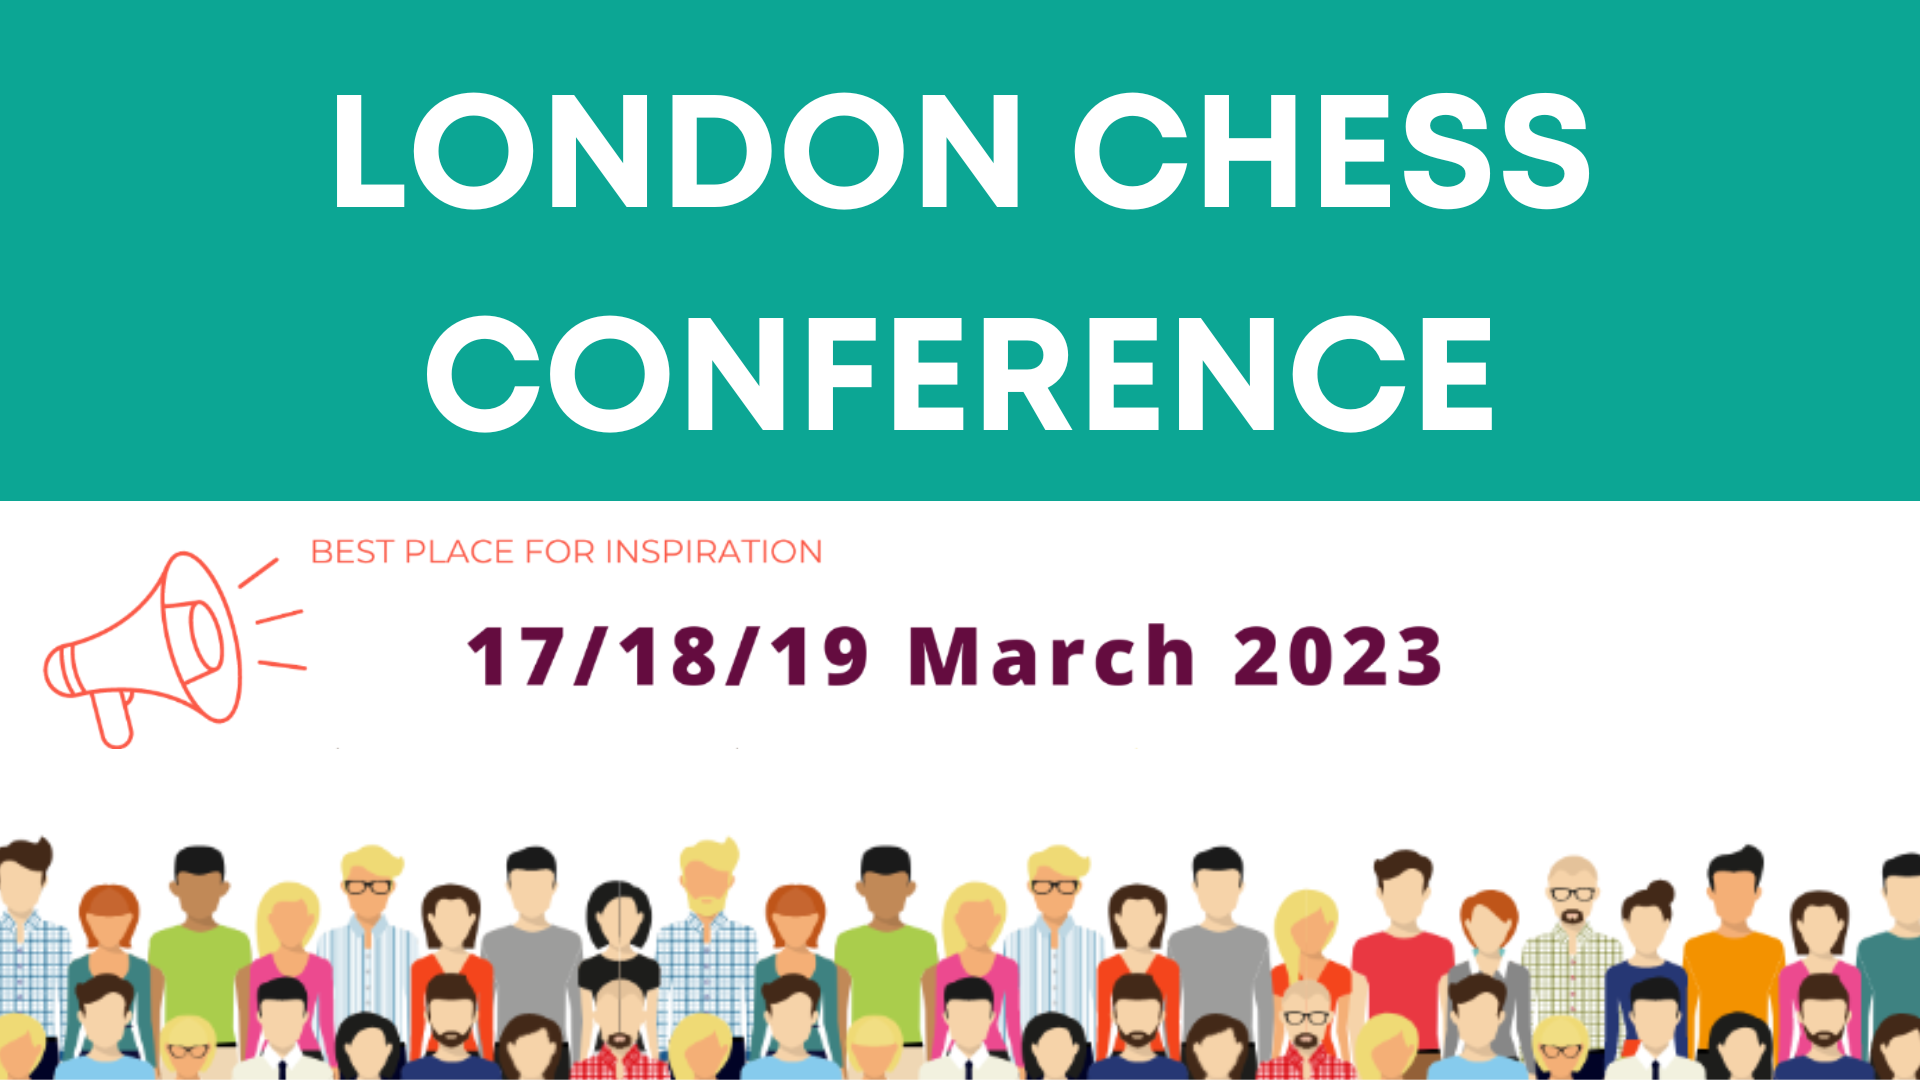 London Chess and Education Conference set for March 17-19